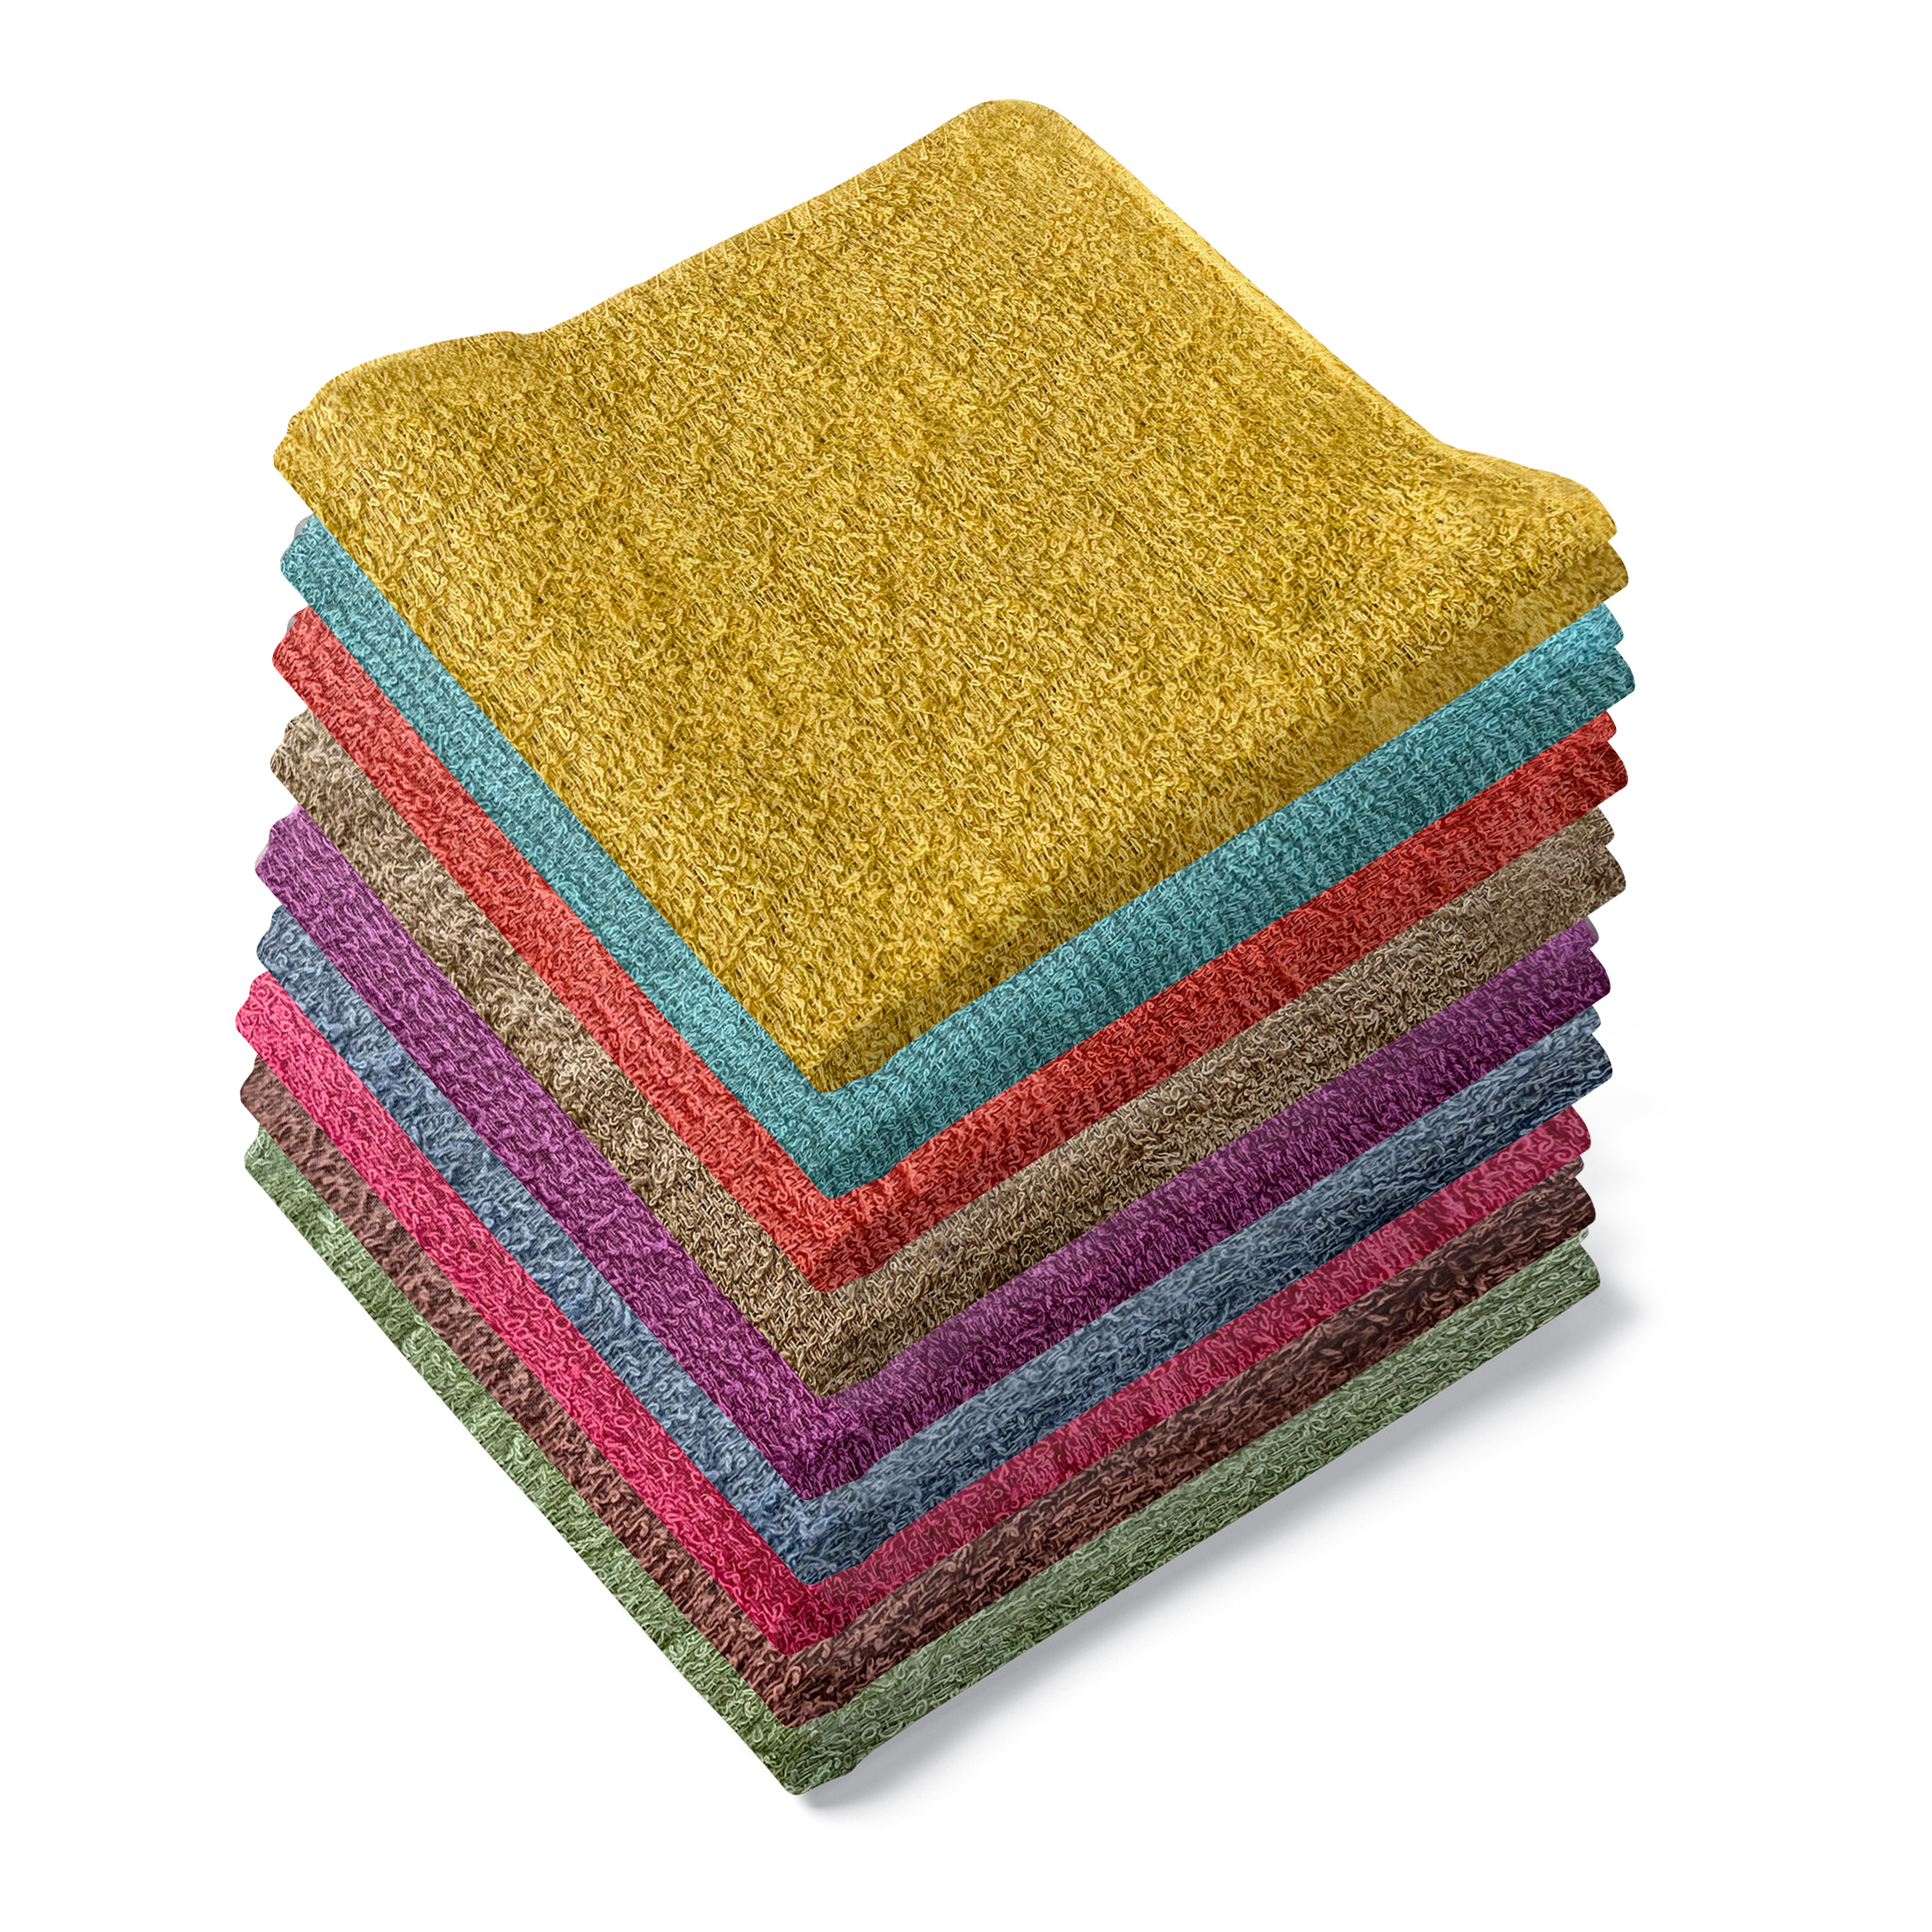 Multi-Pack: Absorbent 100% Cotton Kitchen Cleaning Dish Cloths 12x12 Face Wash Cloth - 6-PK